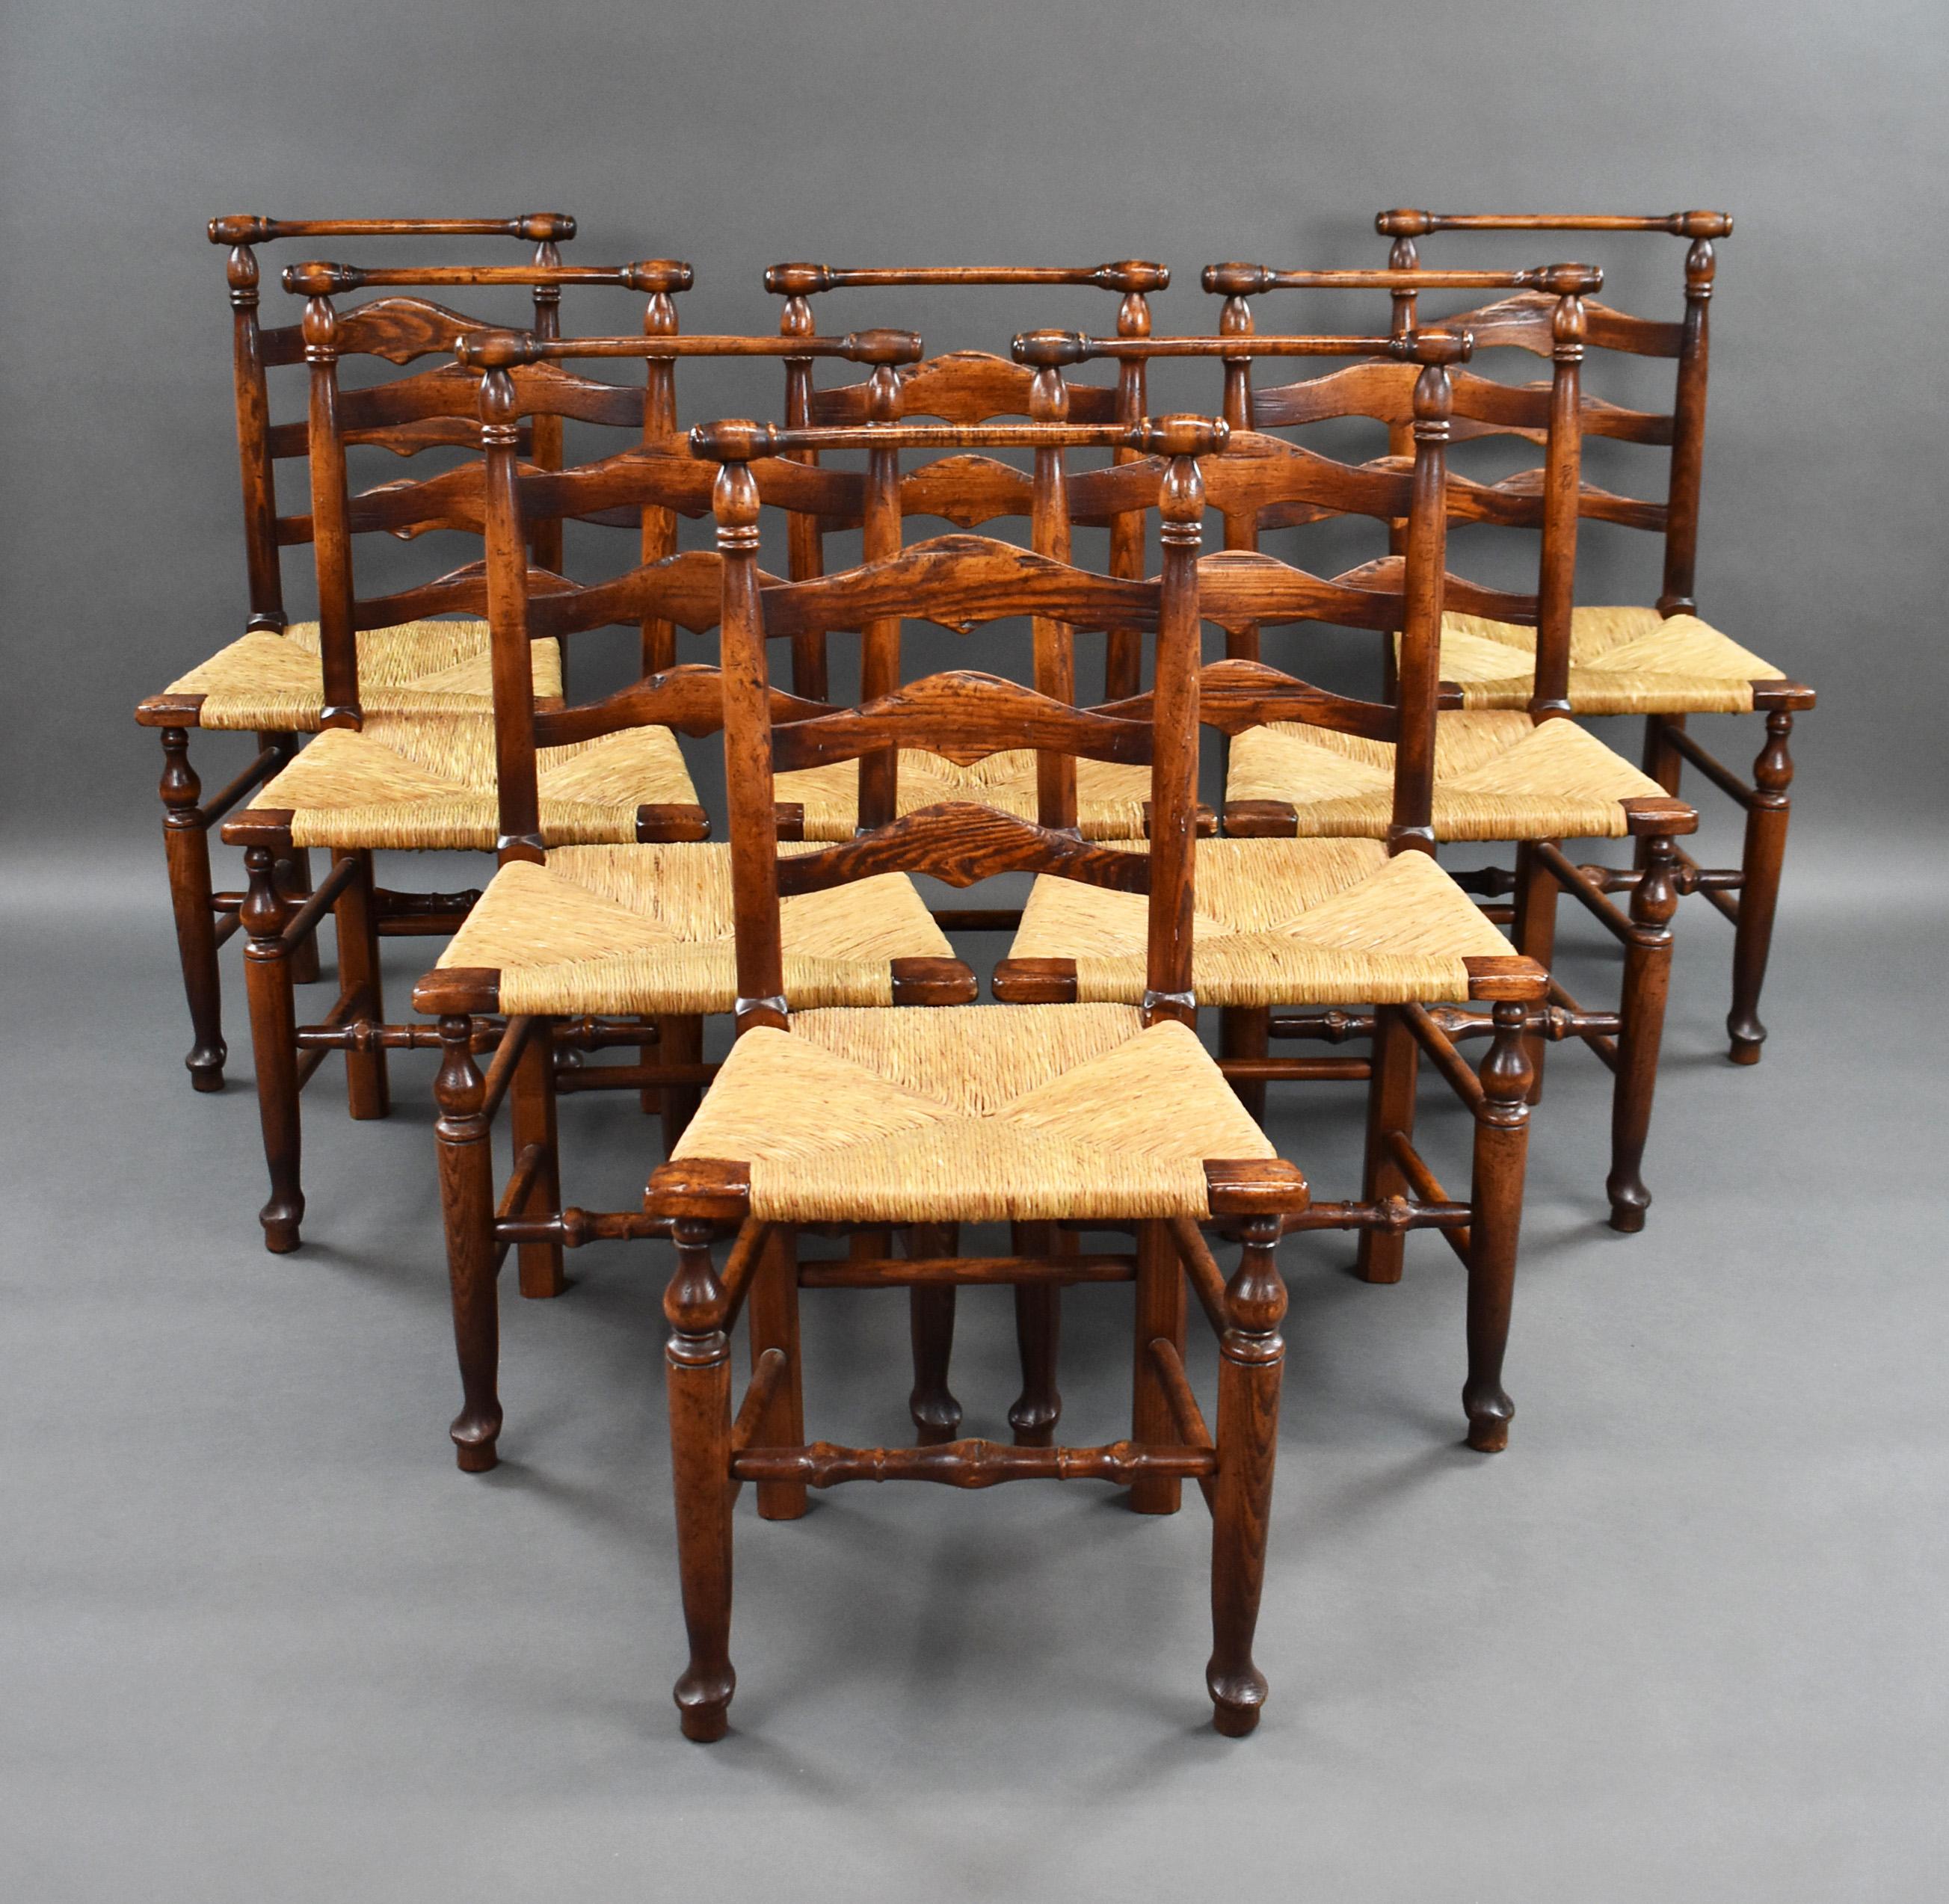 For sale is a good quality set of 18th century style ladder back dining chairs, each with a caned seat and turned understructure. All of the chairs are in very good condition for their age. 

Width: 47cm Depth: 40cm Height: 93cm